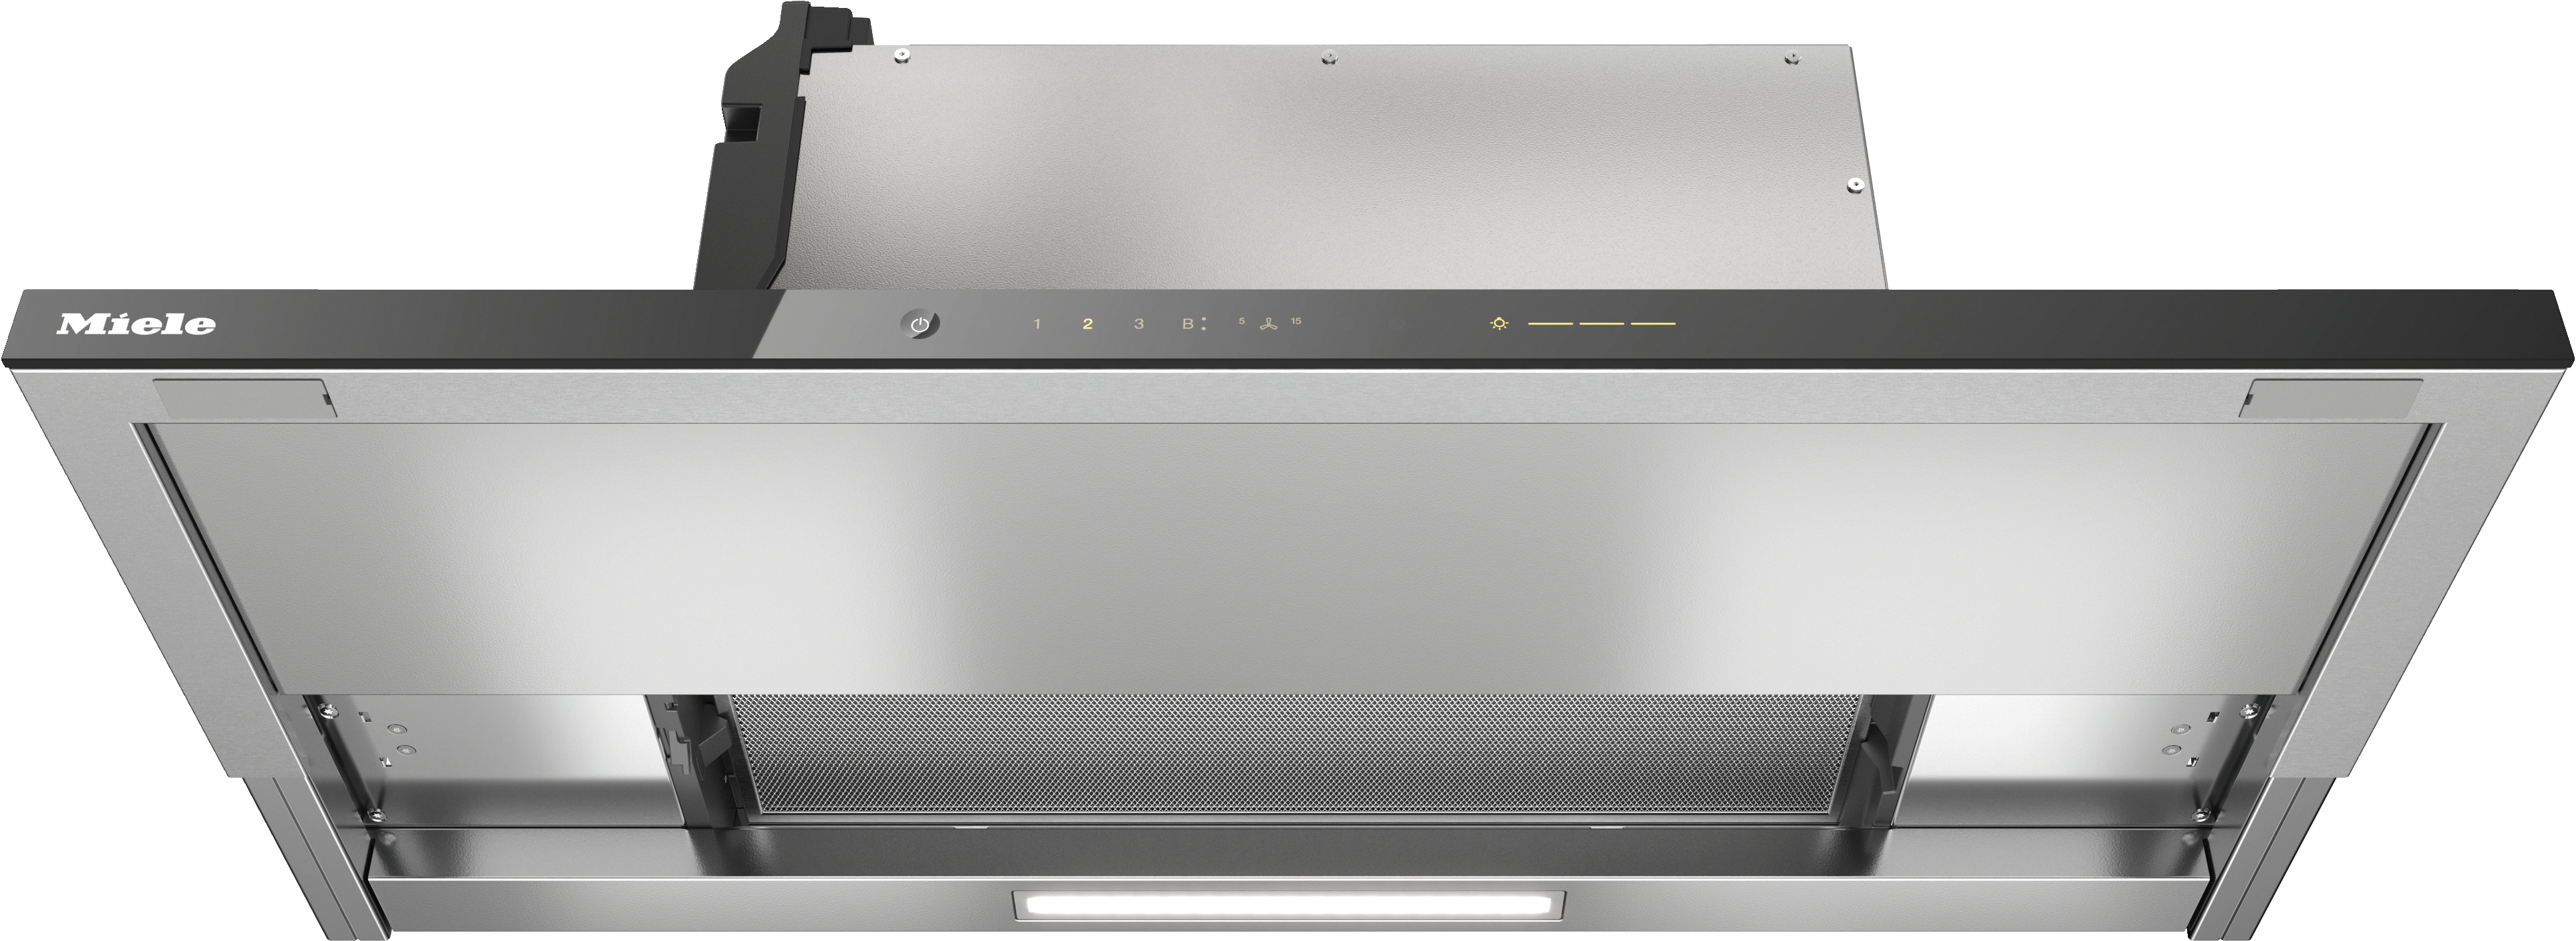 DAS 4930Slimline cooker hood with intuitive SmartControl controls